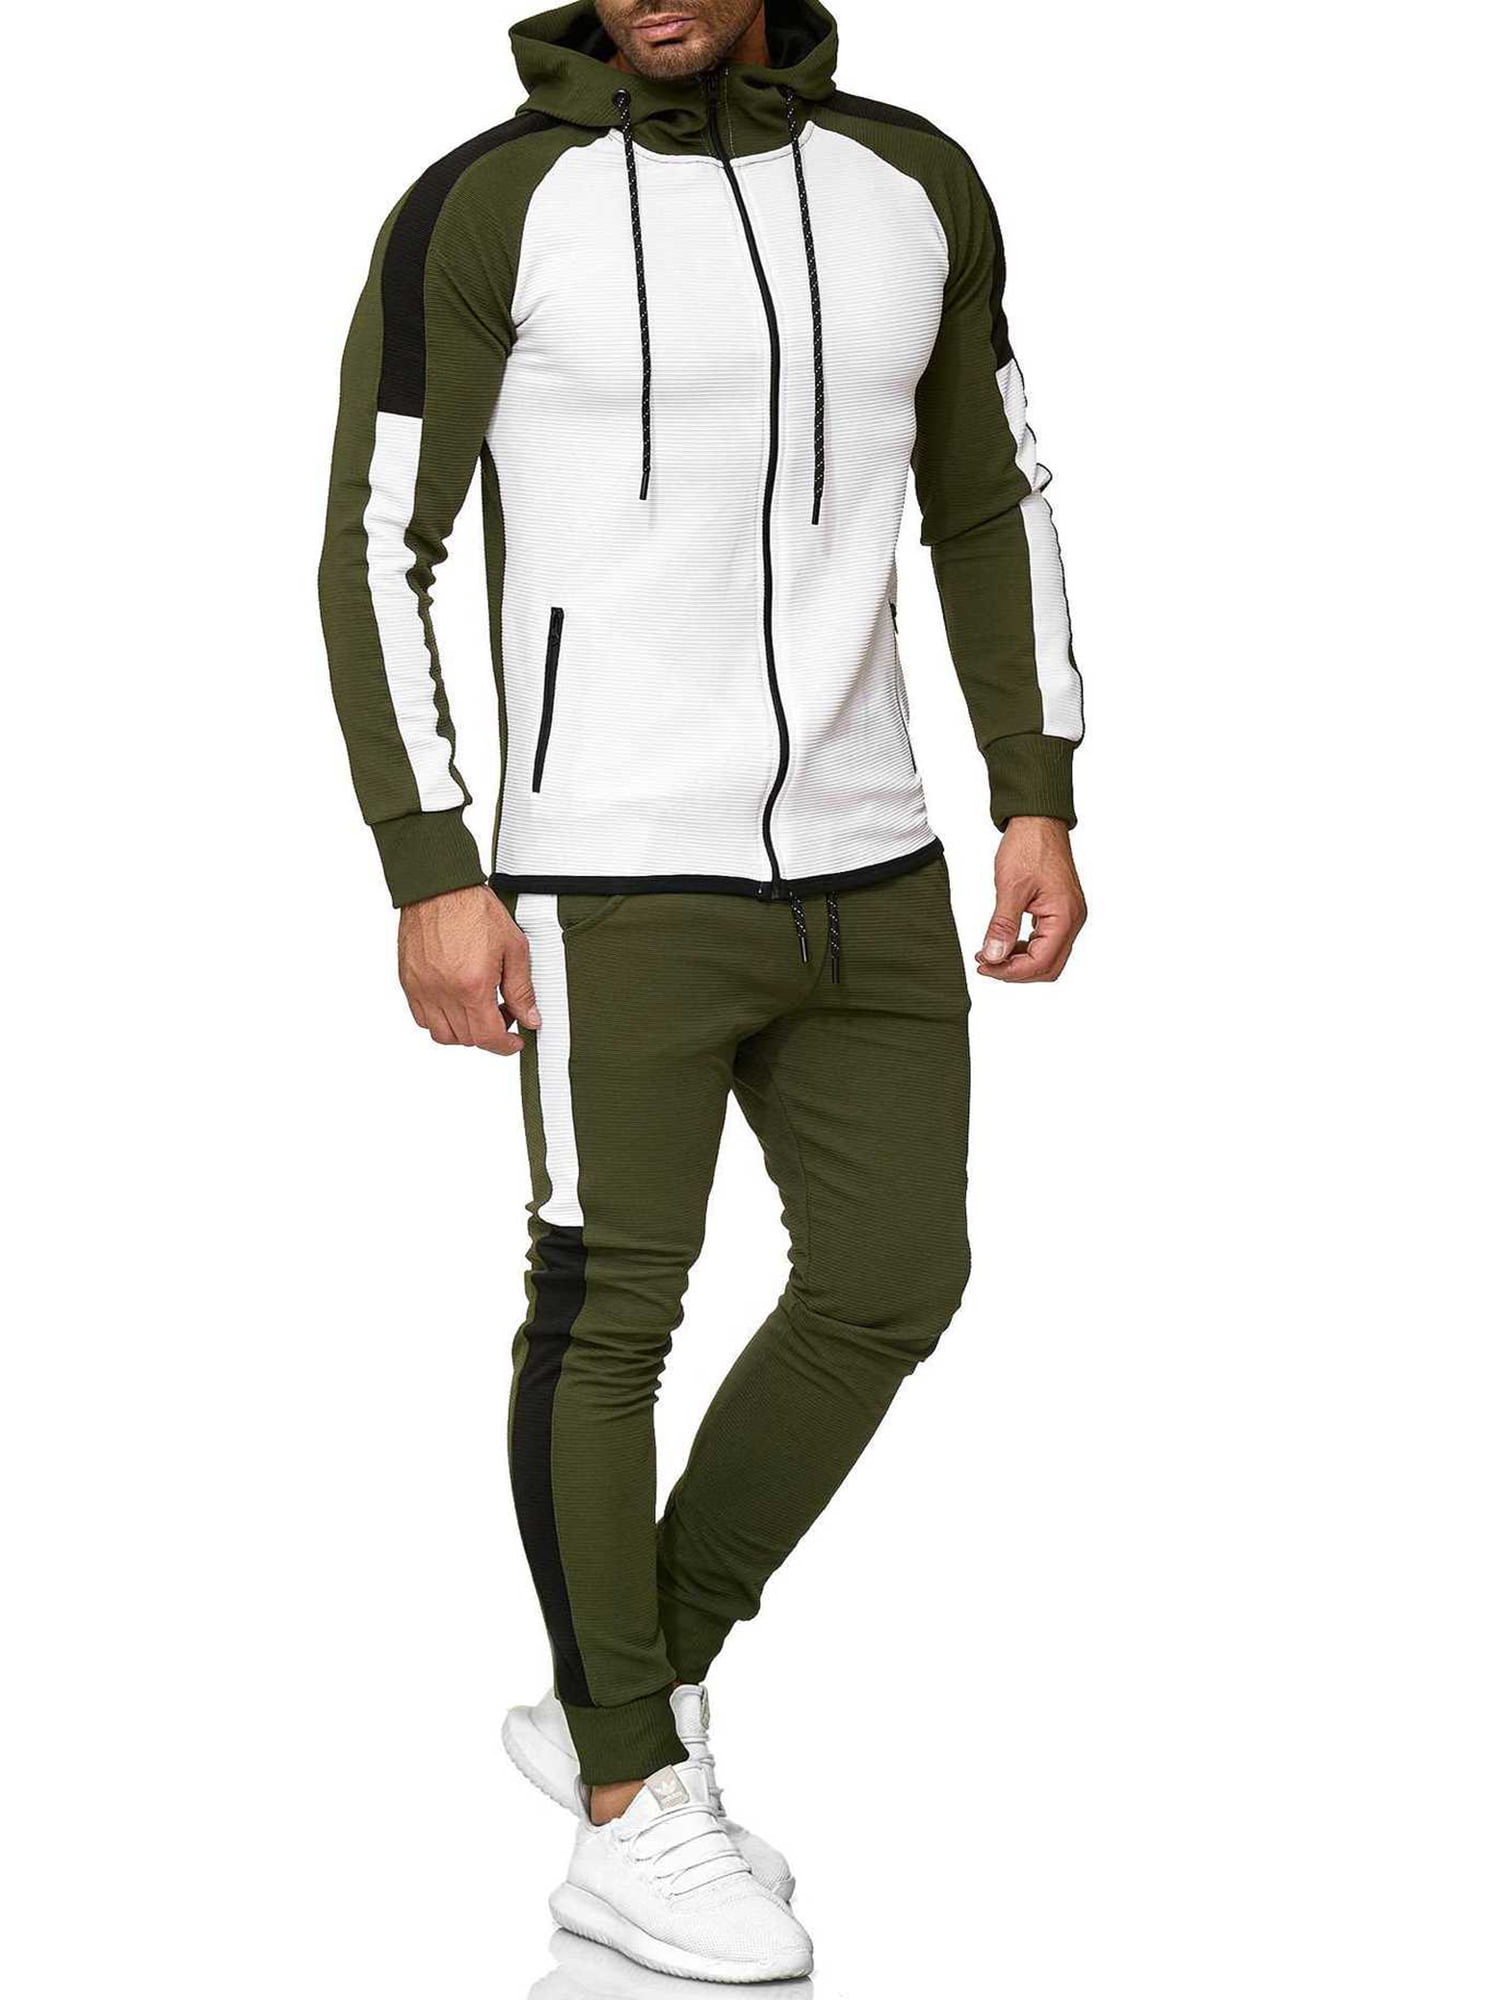 Mens Tracksuit 2 Piece,Mens Hooded Athletic Tracksuit Casual Full Zip Long Sleeve Running Jogging Sweatsuits Sports Set